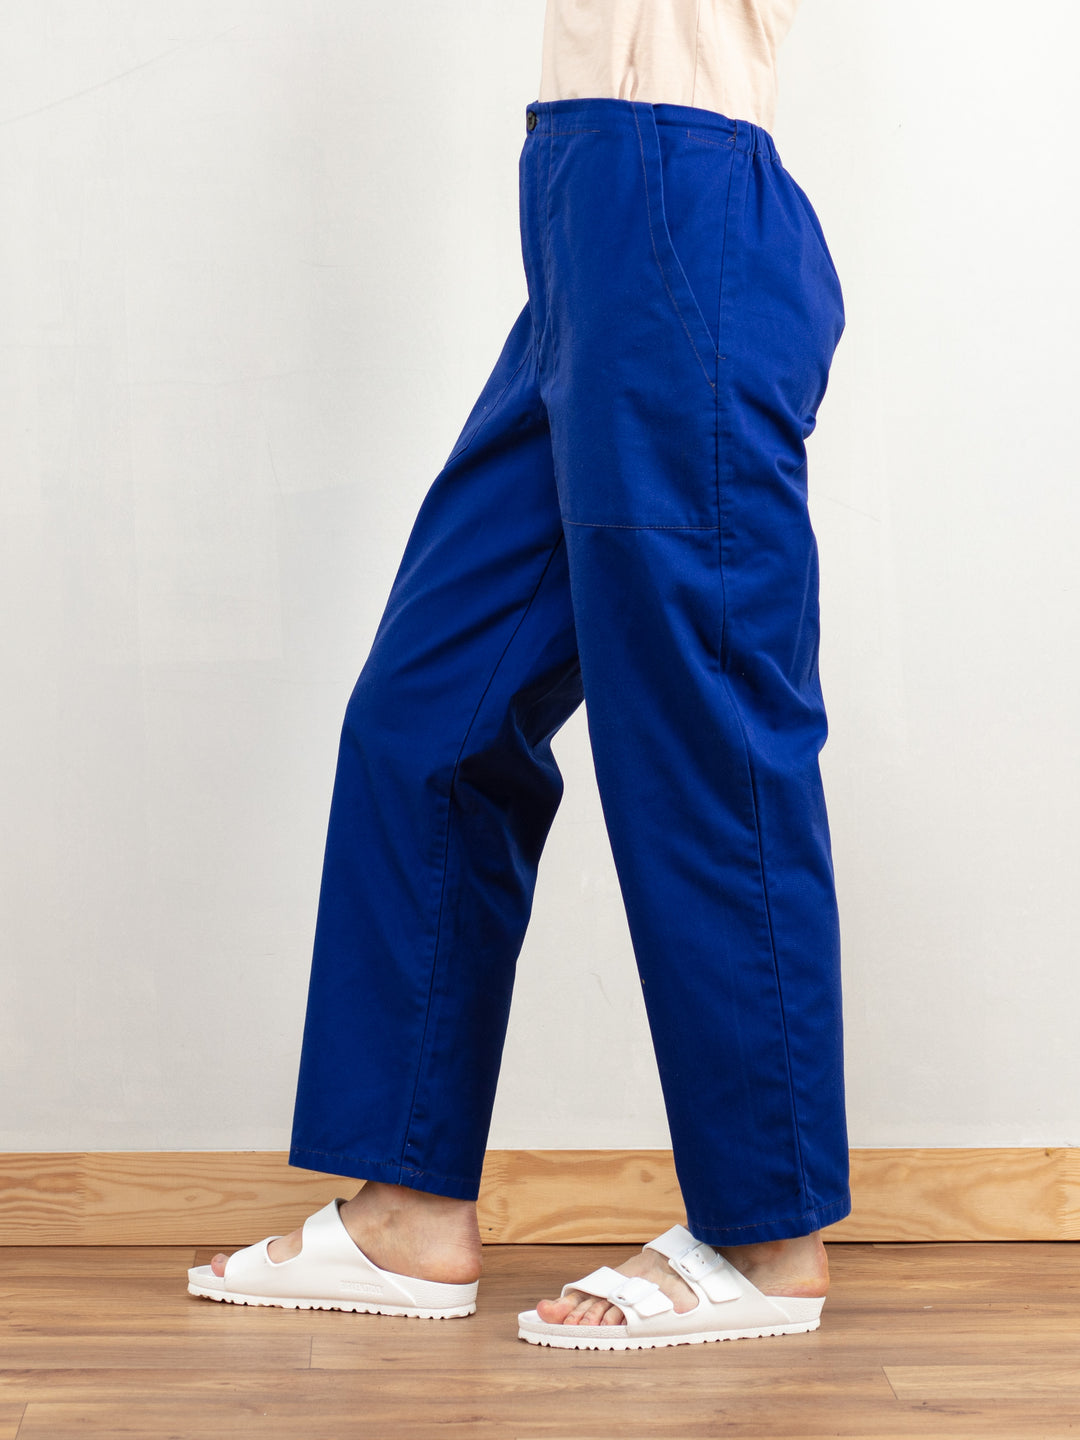 Women Work Pants vintage 90s workwear blue cargo casual pants straight painter pants high rise utility pants vintage clothing size small